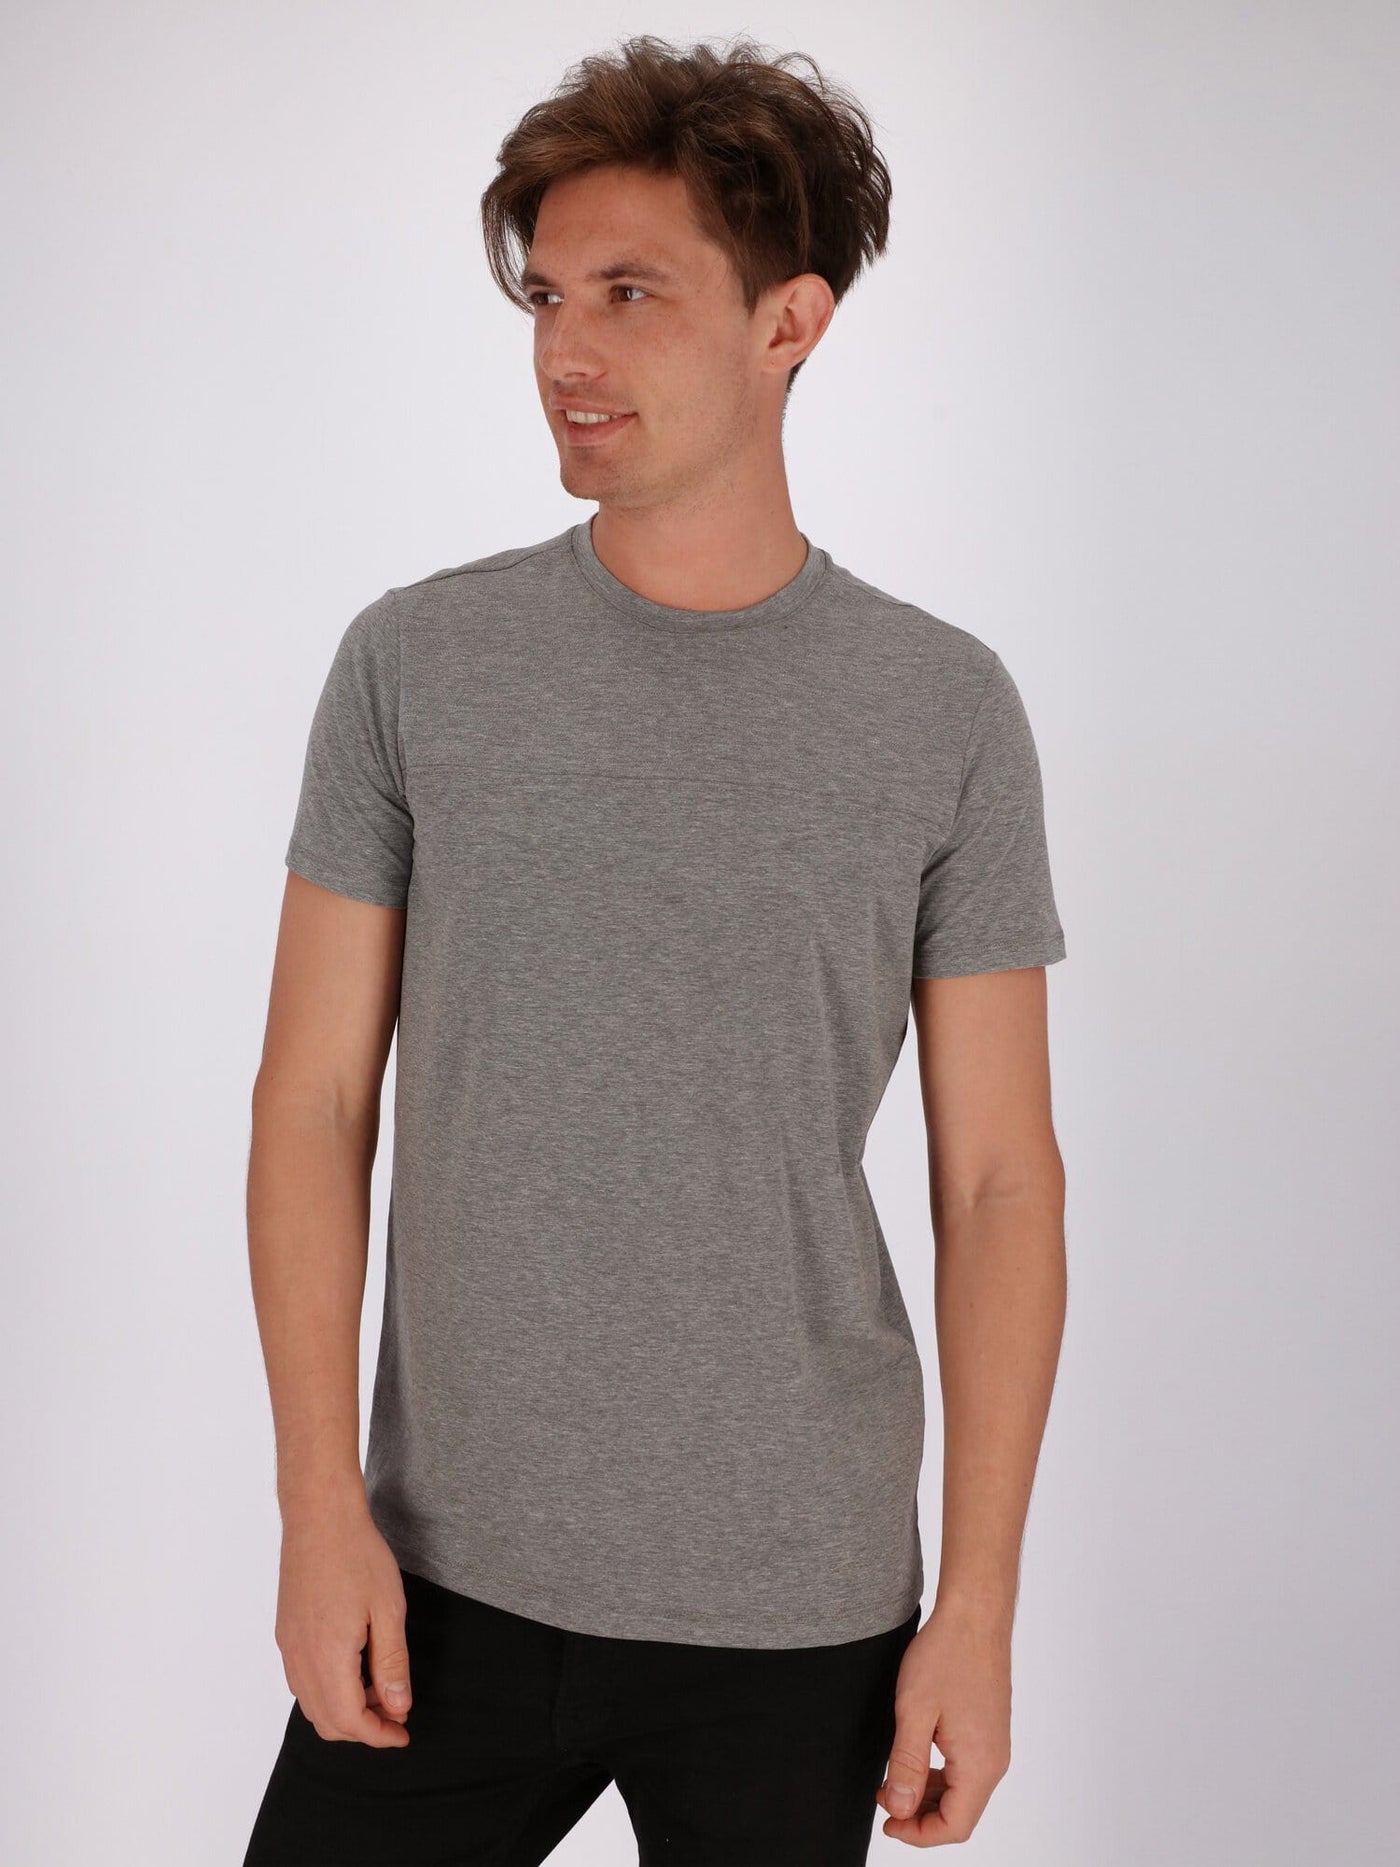 OR T-Shirts Heather Grey / S Basic T-shirt with Front-line Crosswise